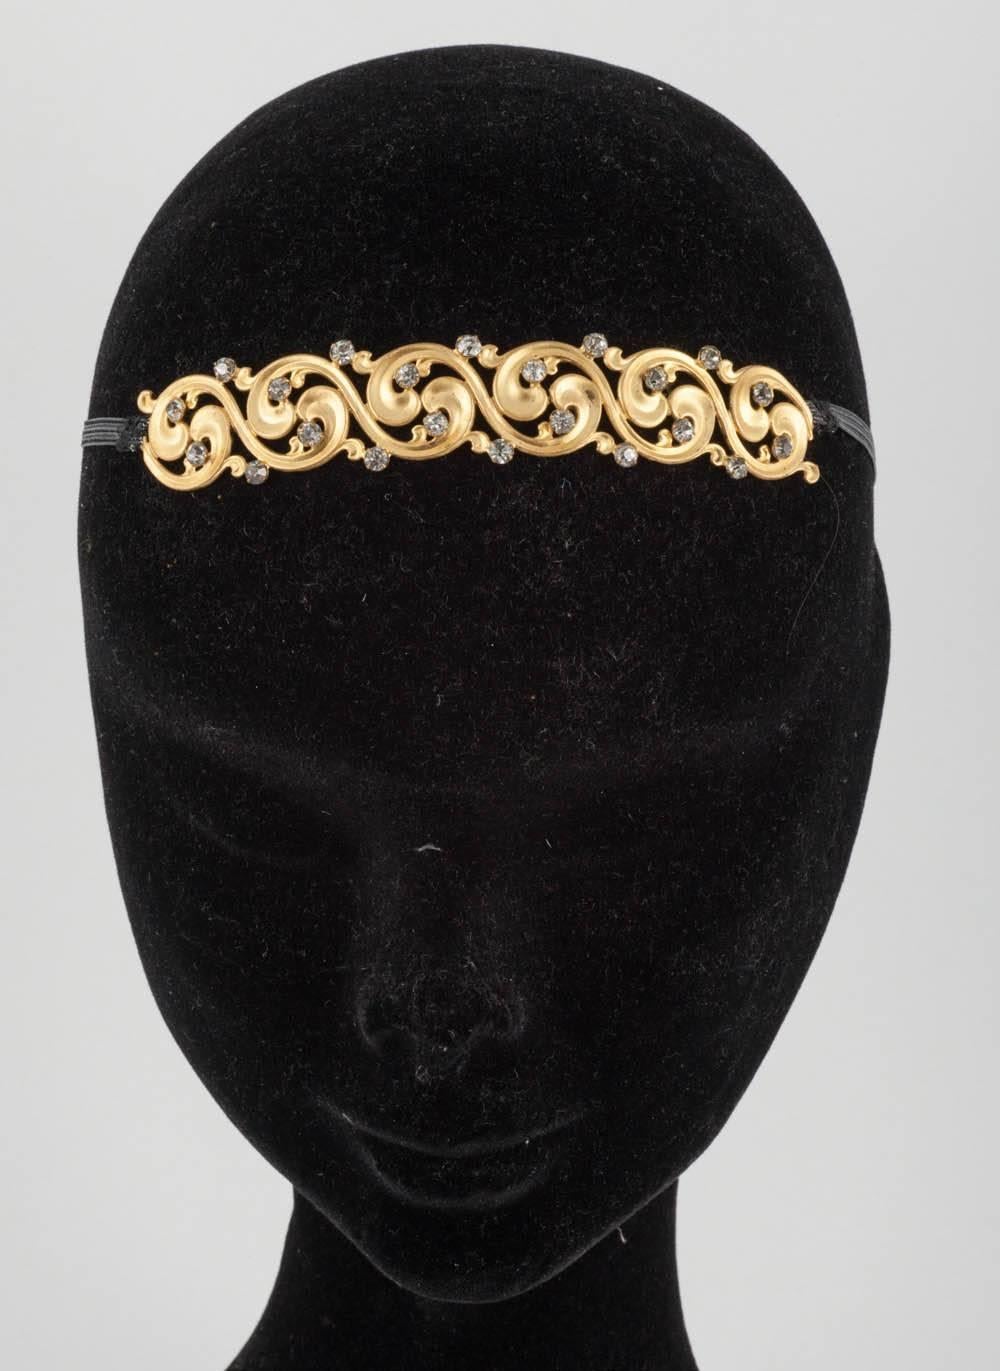 This lovely slightly curved small headdress is early Victorian. It has a curling scroll work of gilt metal and old paste accents that have a slight grey tint. It has rings at each end to secure it to the wearer's head. I have put a new small black